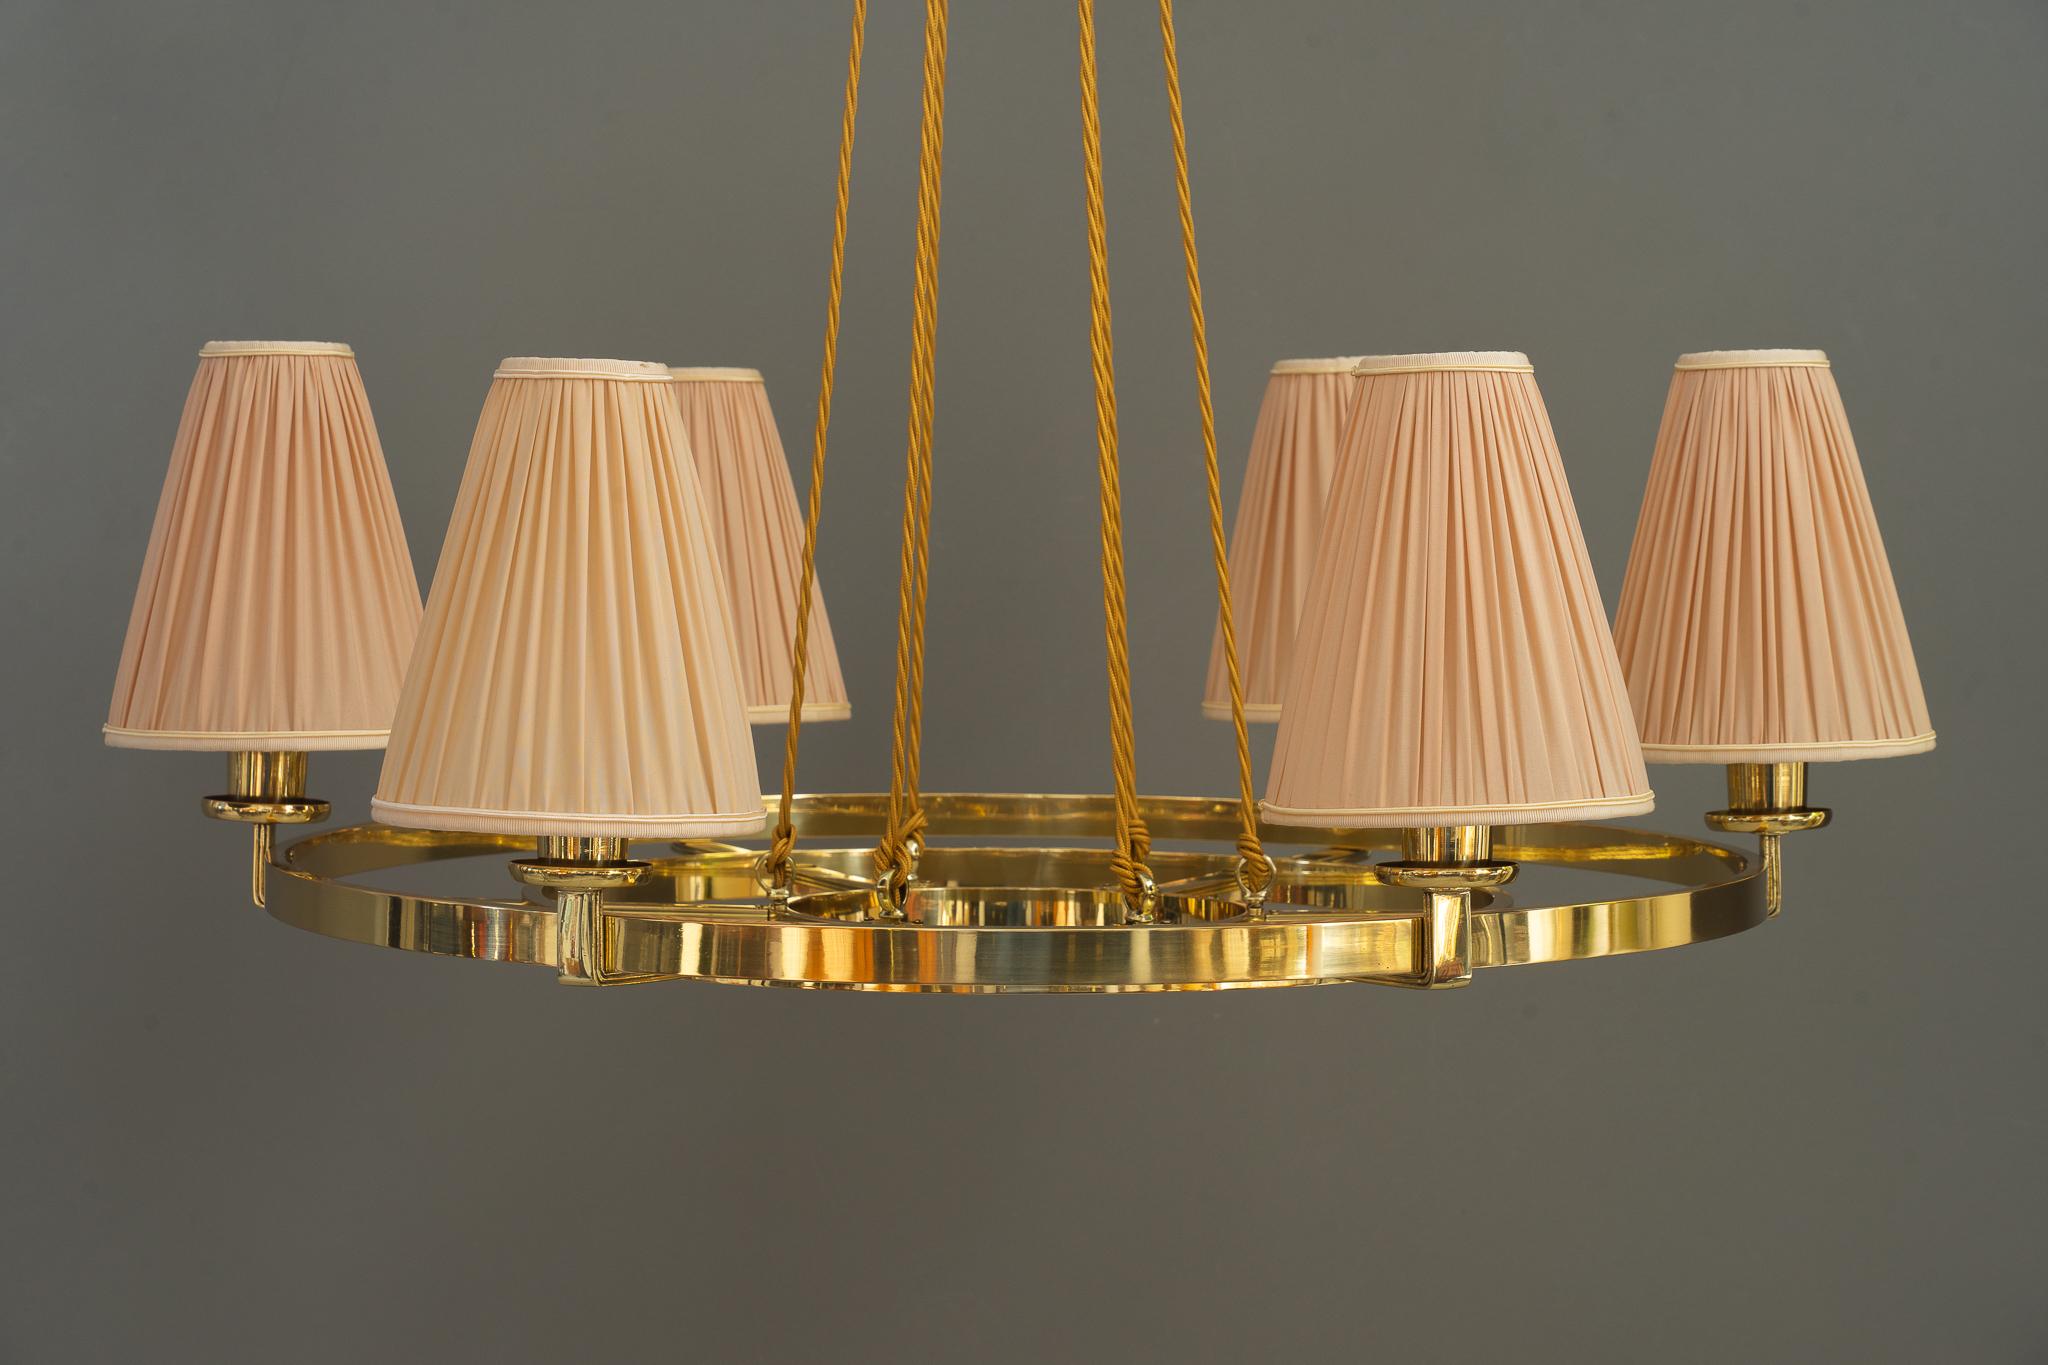 Big Chandelier vienna around 1950s by Rupert Nikoll
Brass polished and stove enameled
The fabric shades are replaced (new).